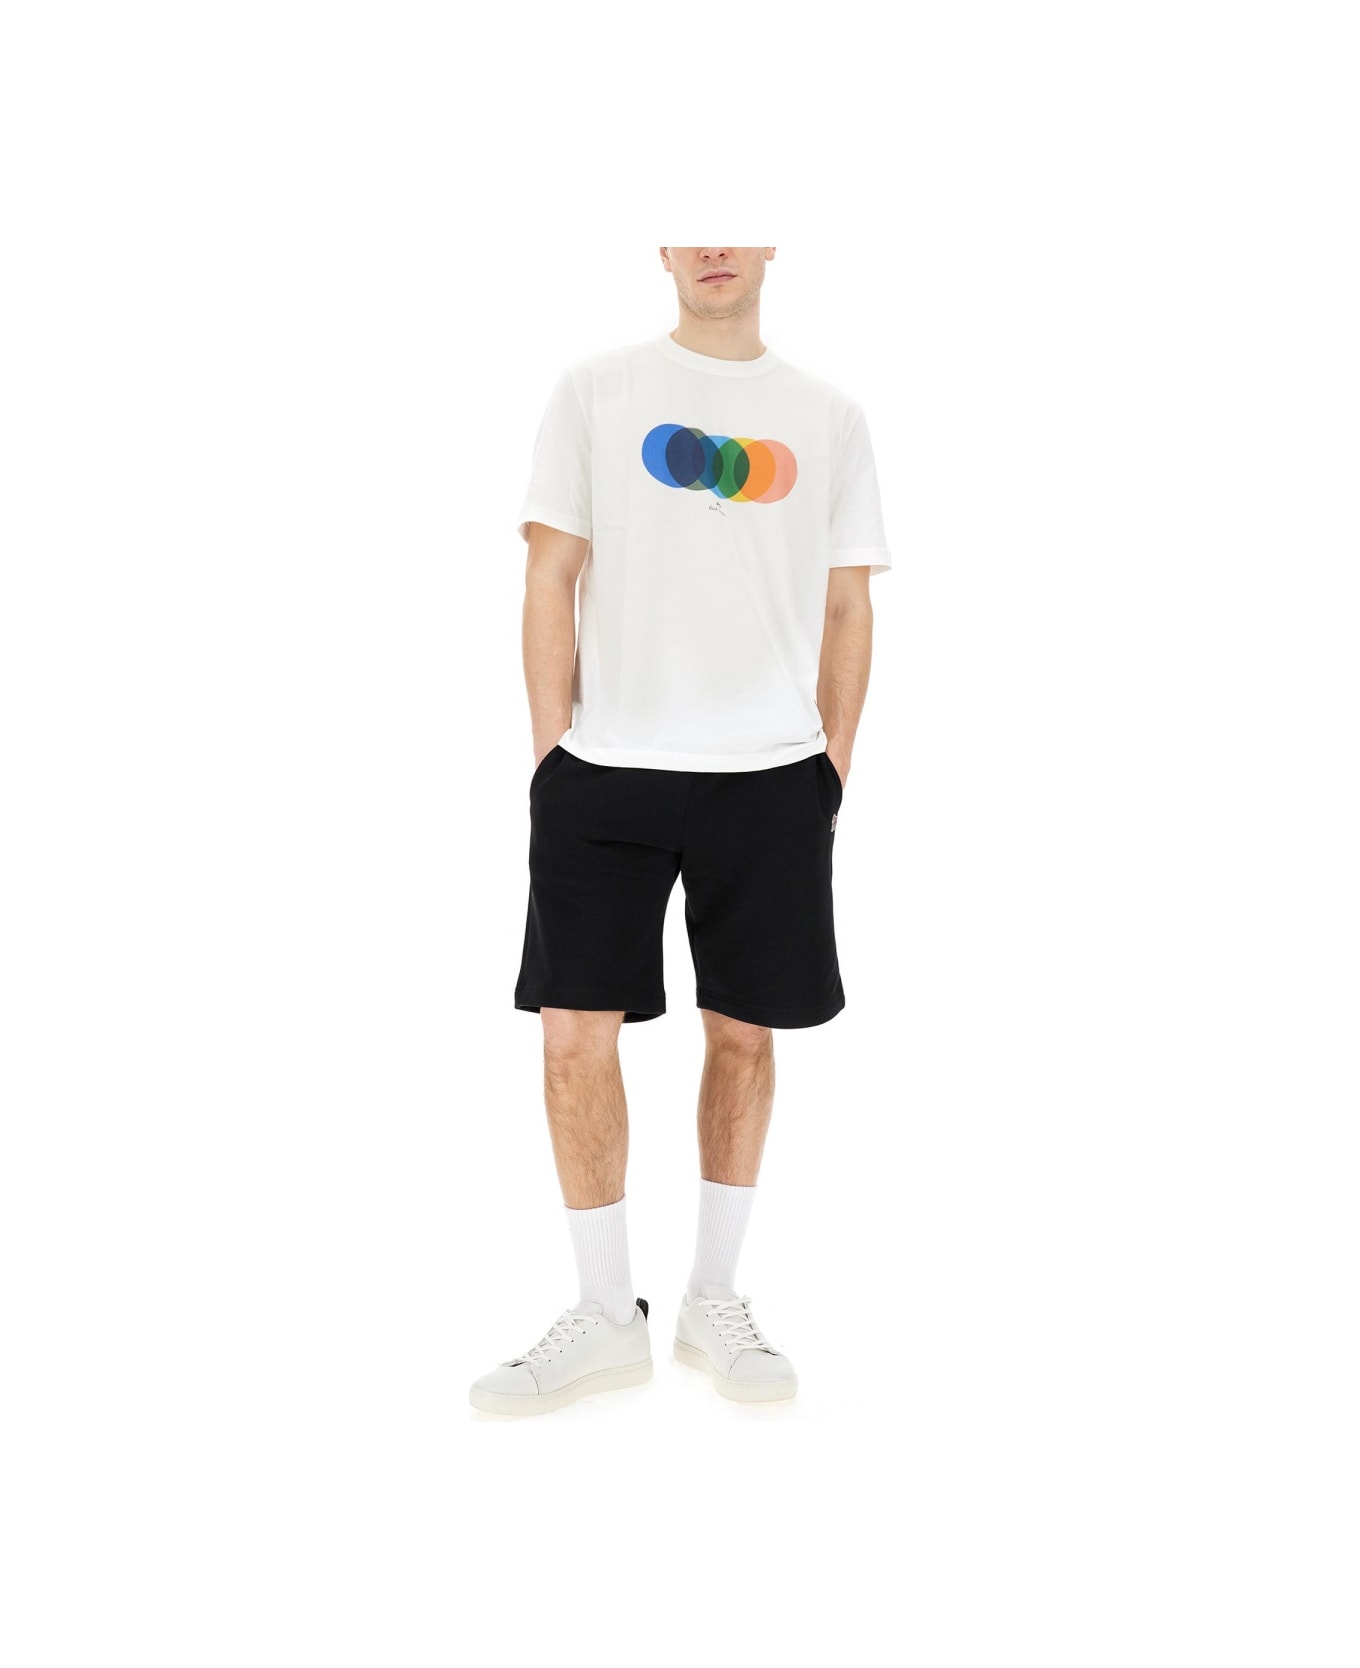 PS by Paul Smith "circles" T-shirt - WHITE